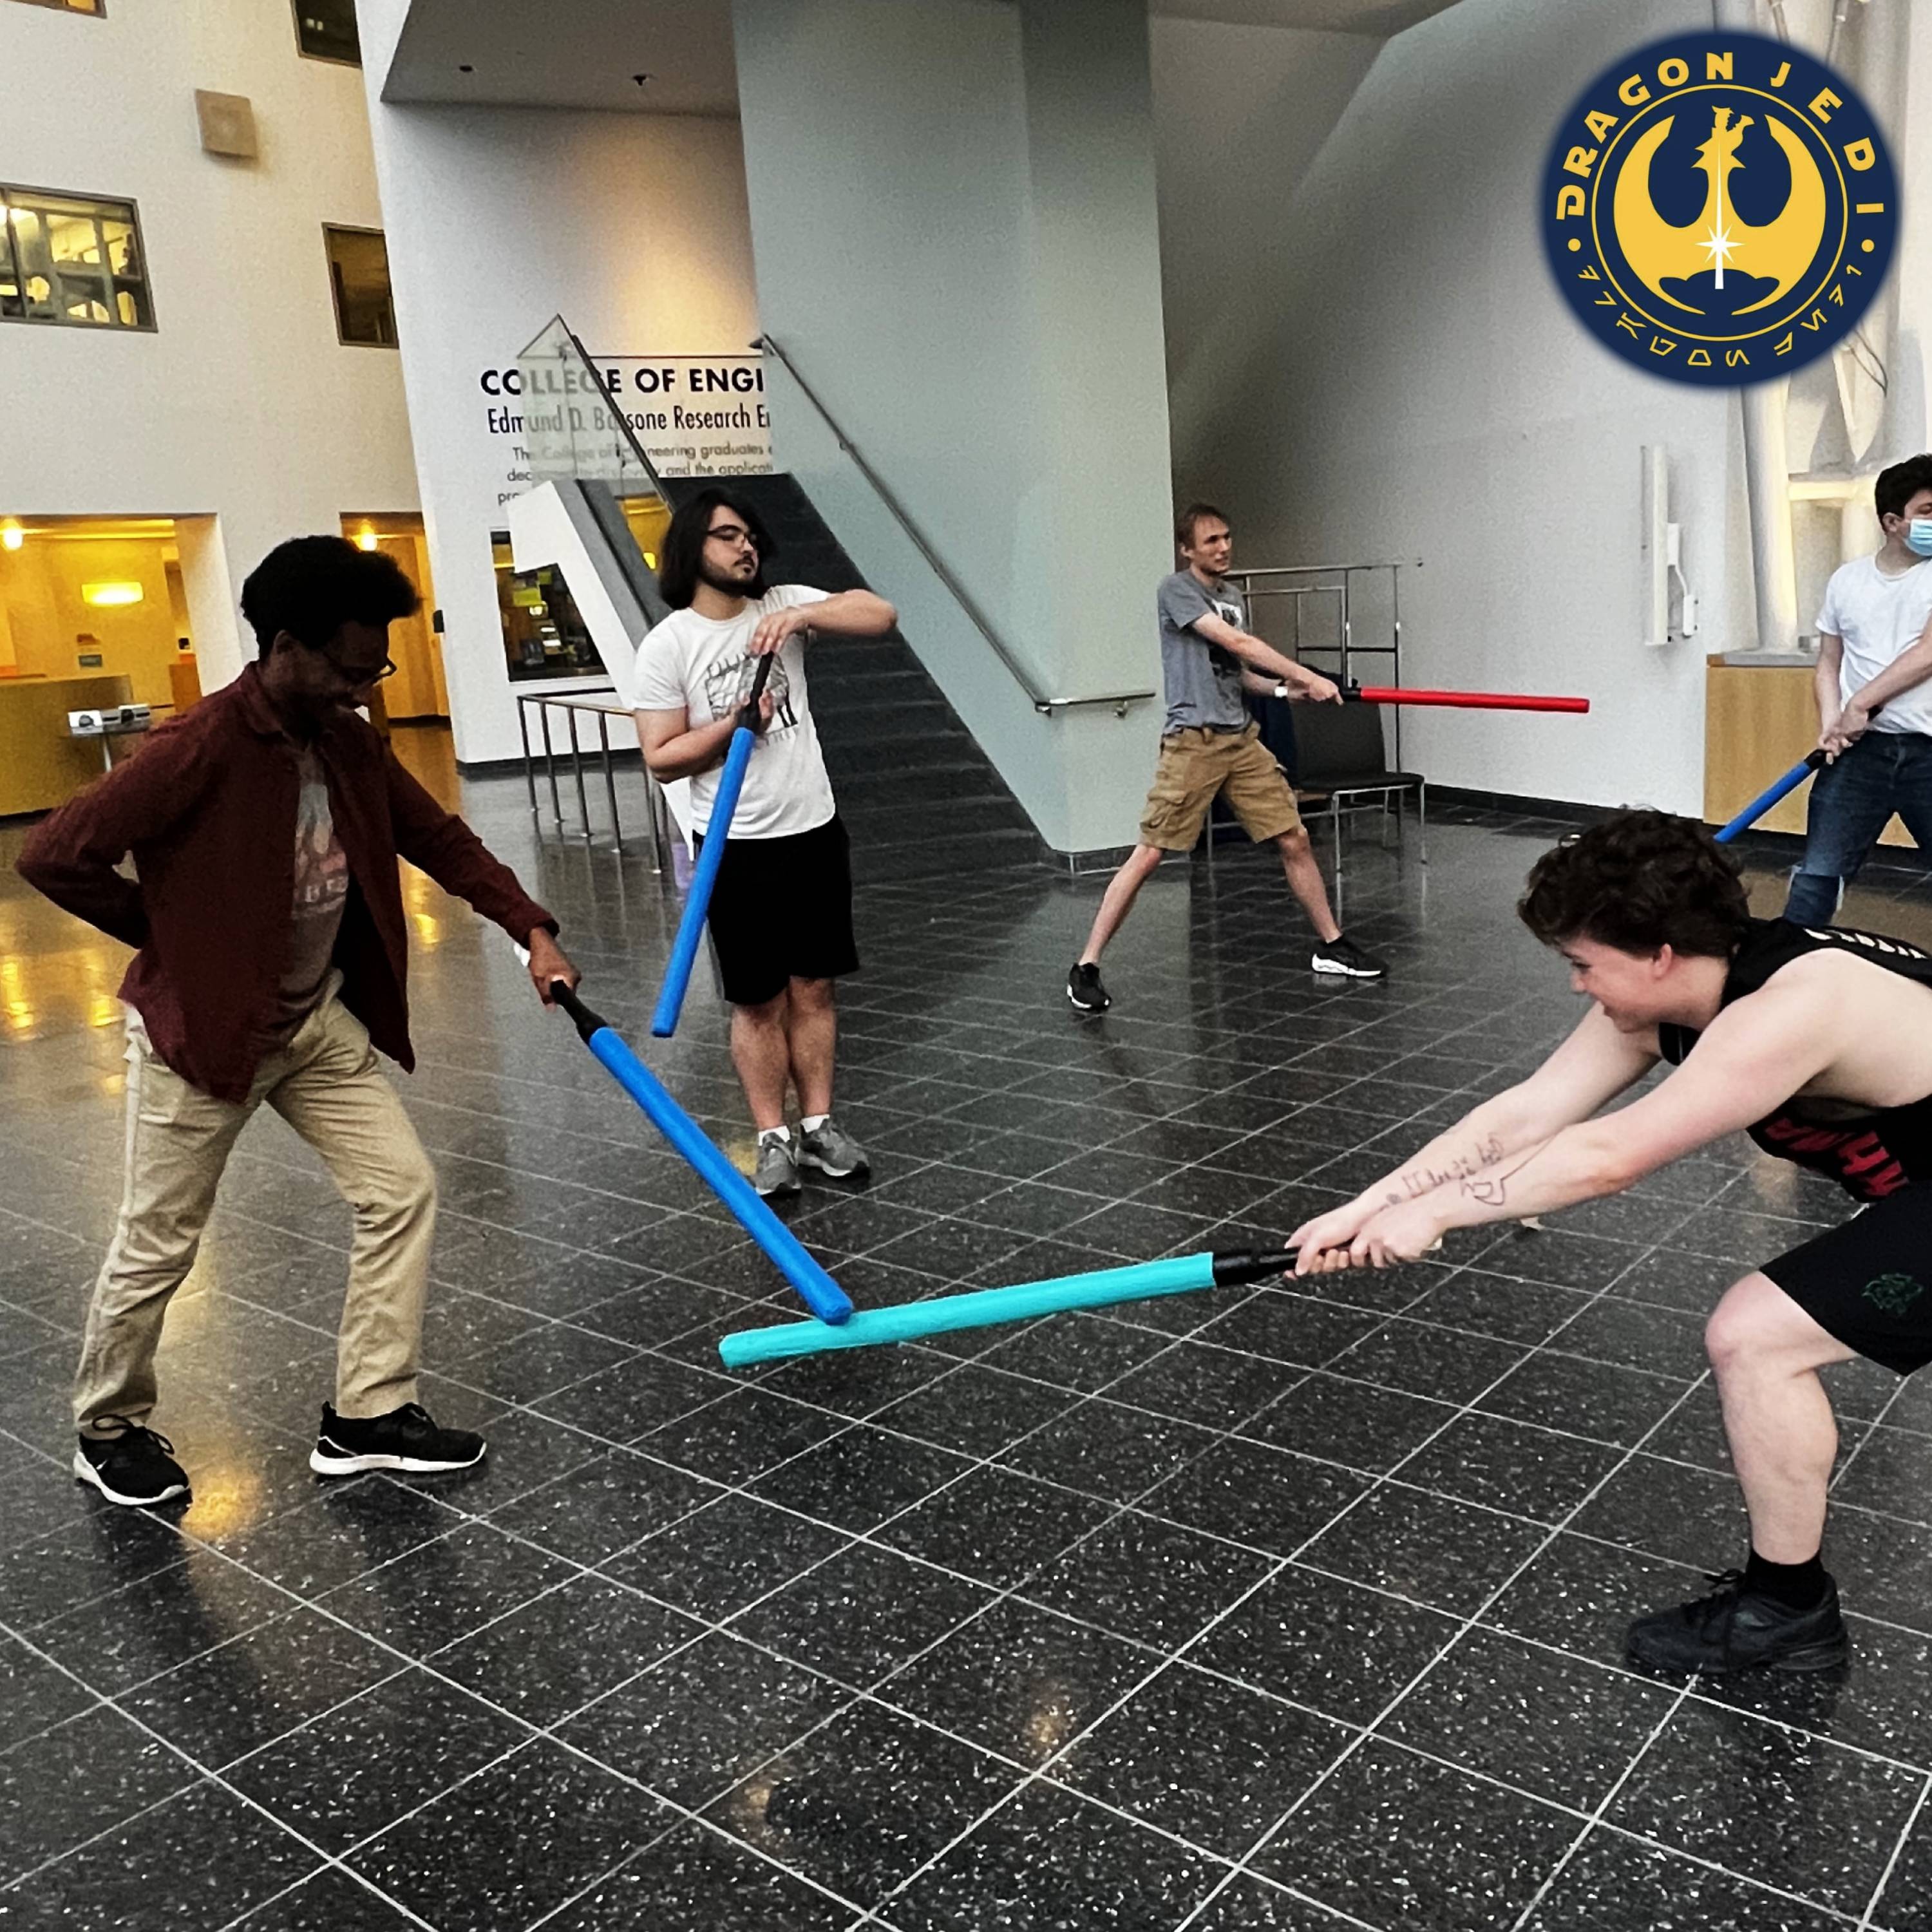 Students practicing with soft lightsabers